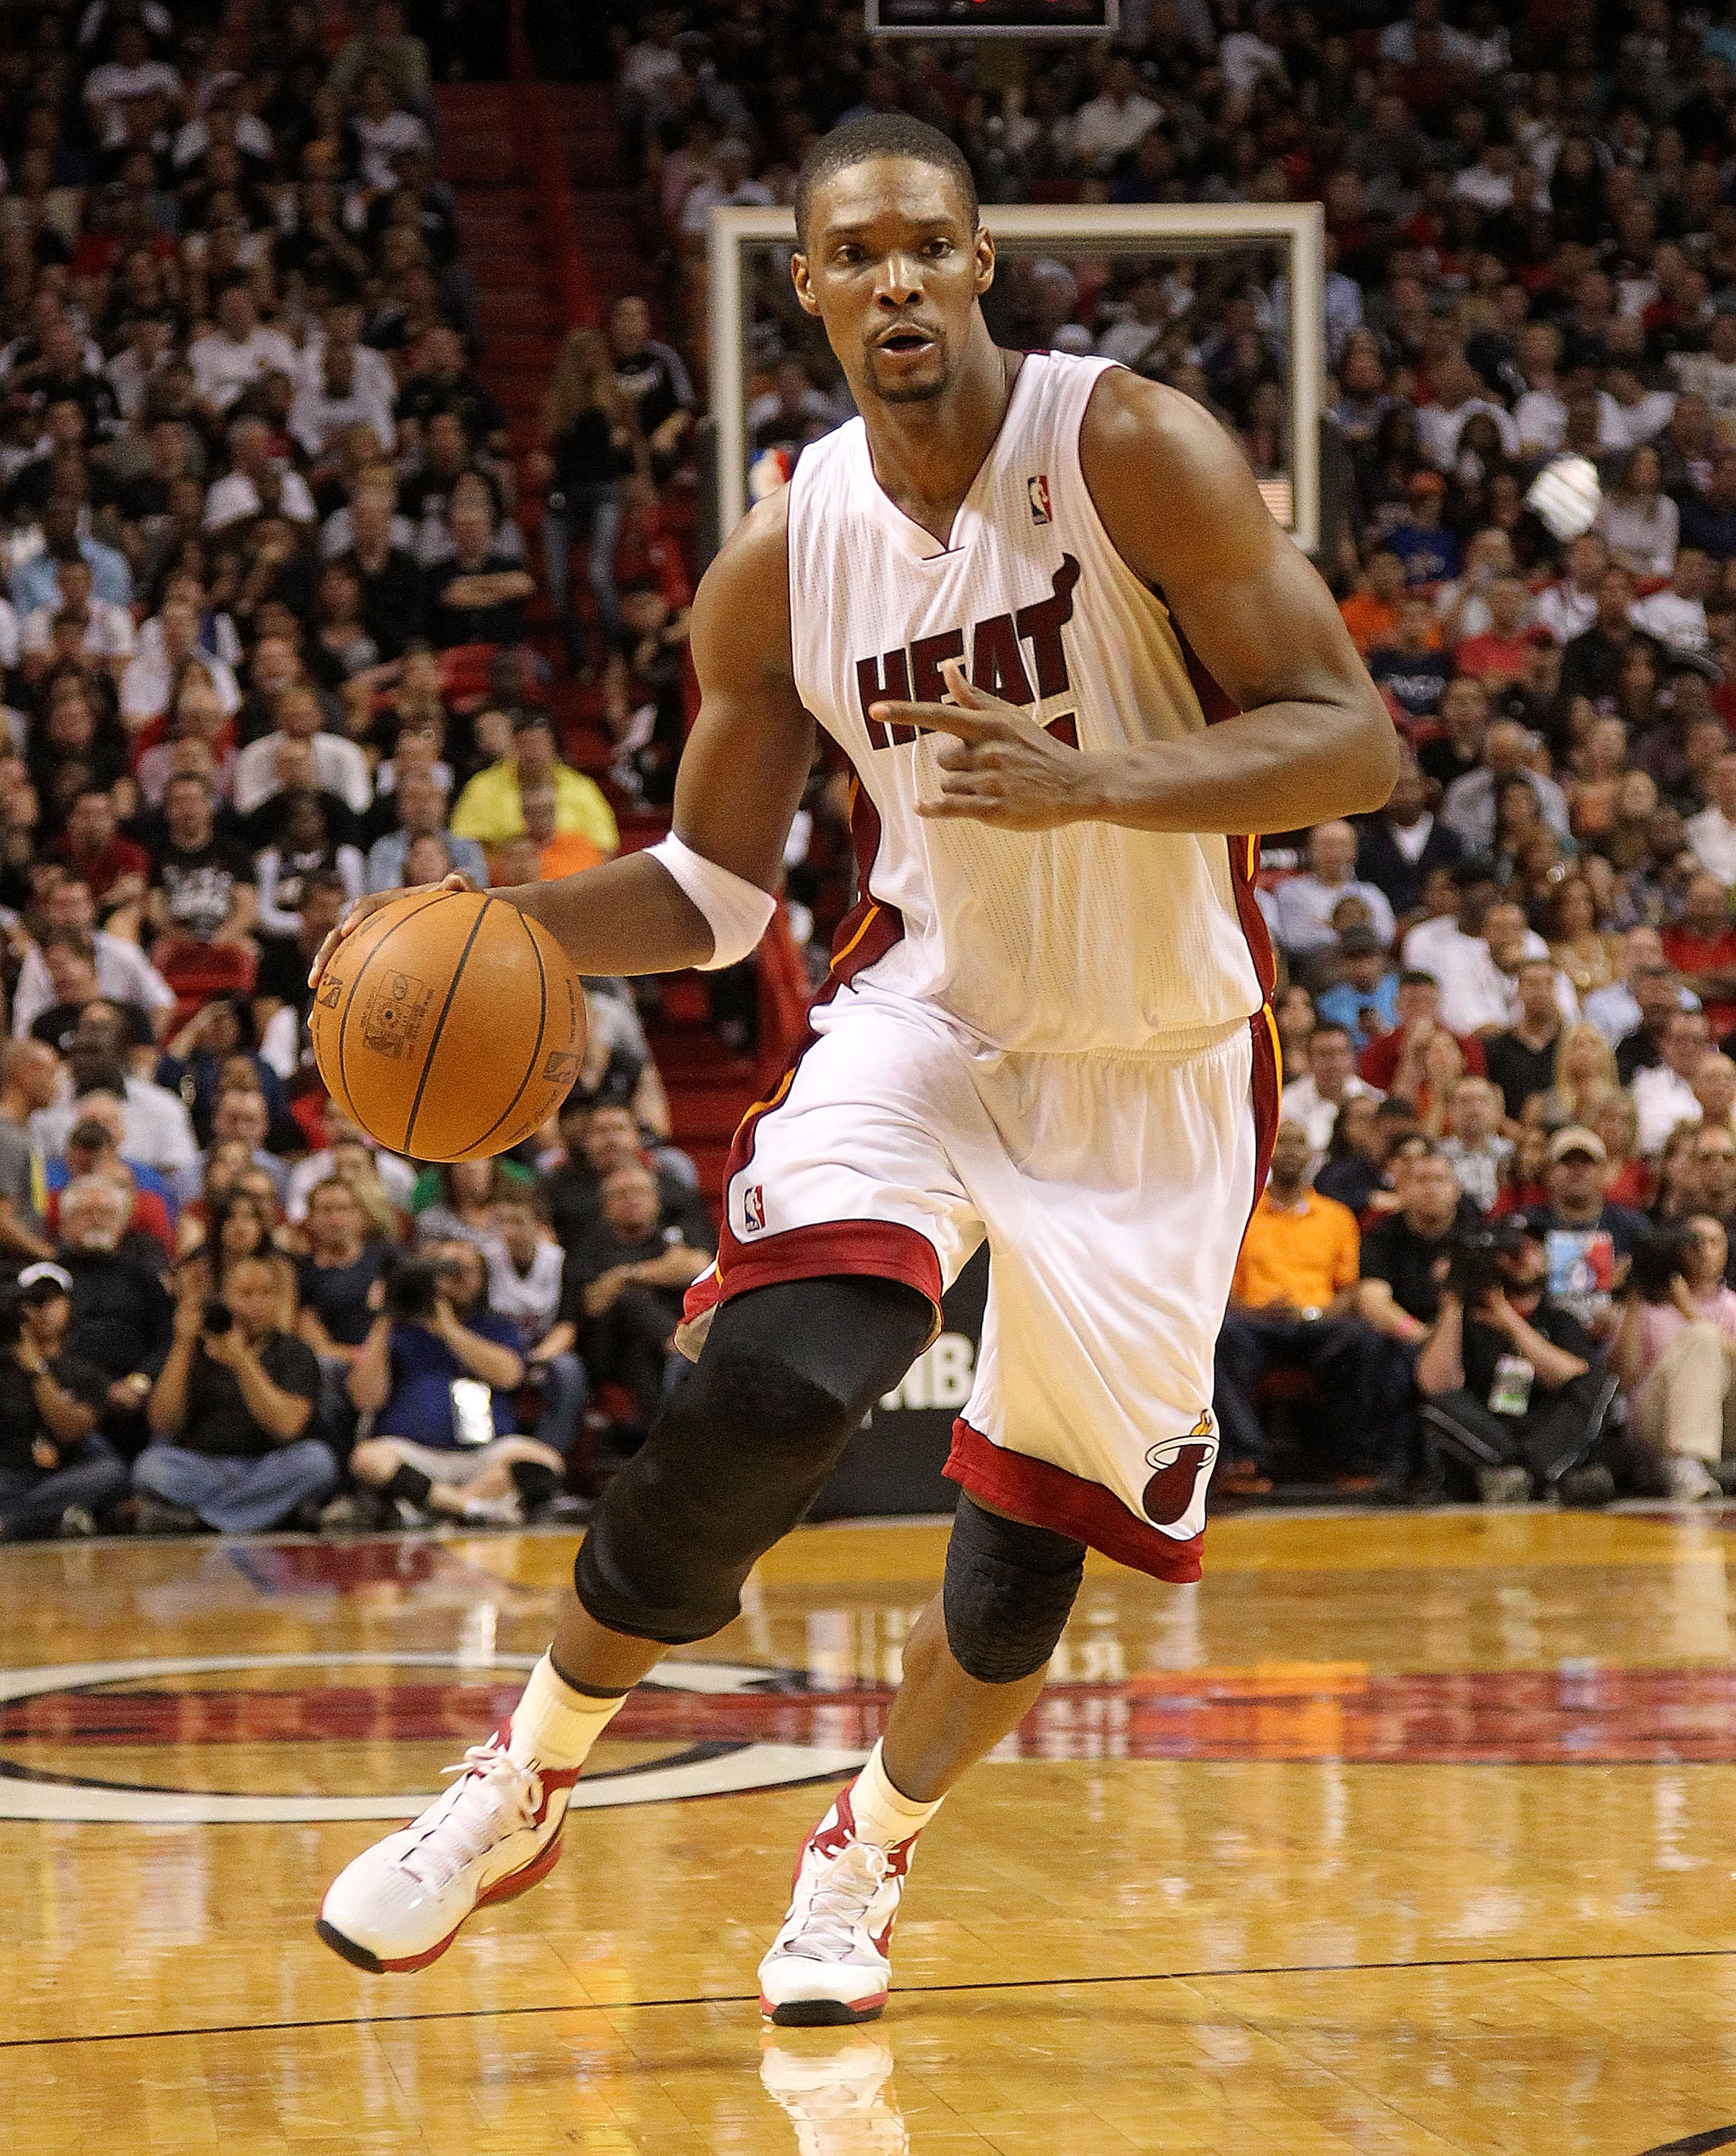 MIAMI, FL - FEBRUARY 27: Chris Bosh #1 of the Miami Heat drives during a game gainst the New York Knicks at American Airlines Arena on February 27, 2011 in Miami, Florida. NOTE TO USER: User expressly acknowledges and agrees that, by downloading and/or us